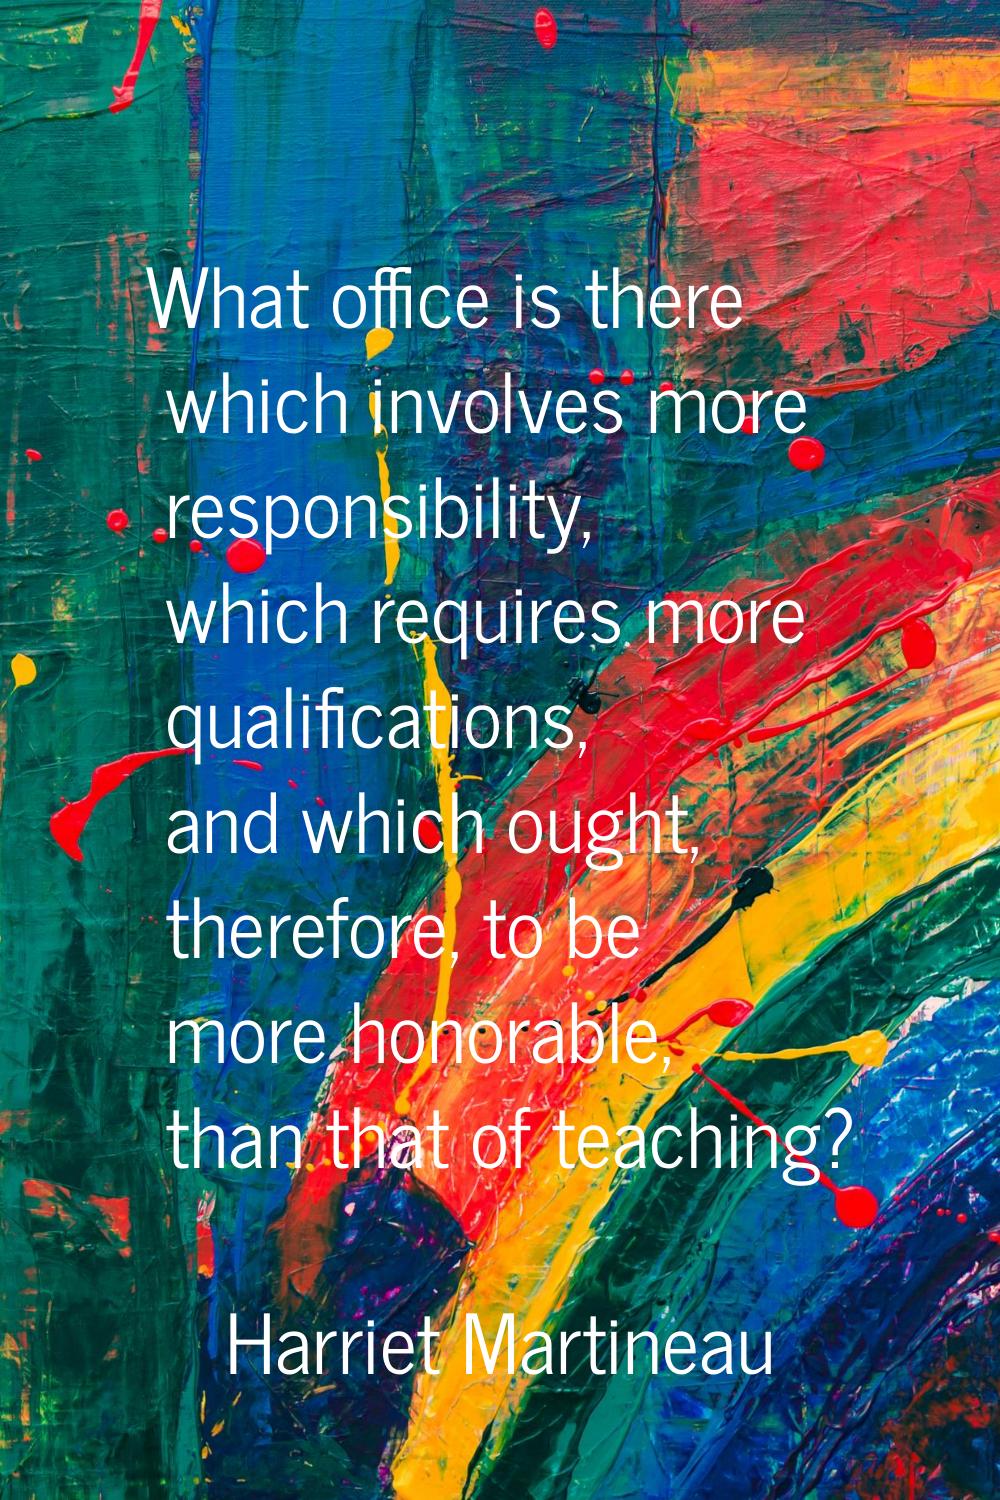 What office is there which involves more responsibility, which requires more qualifications, and wh